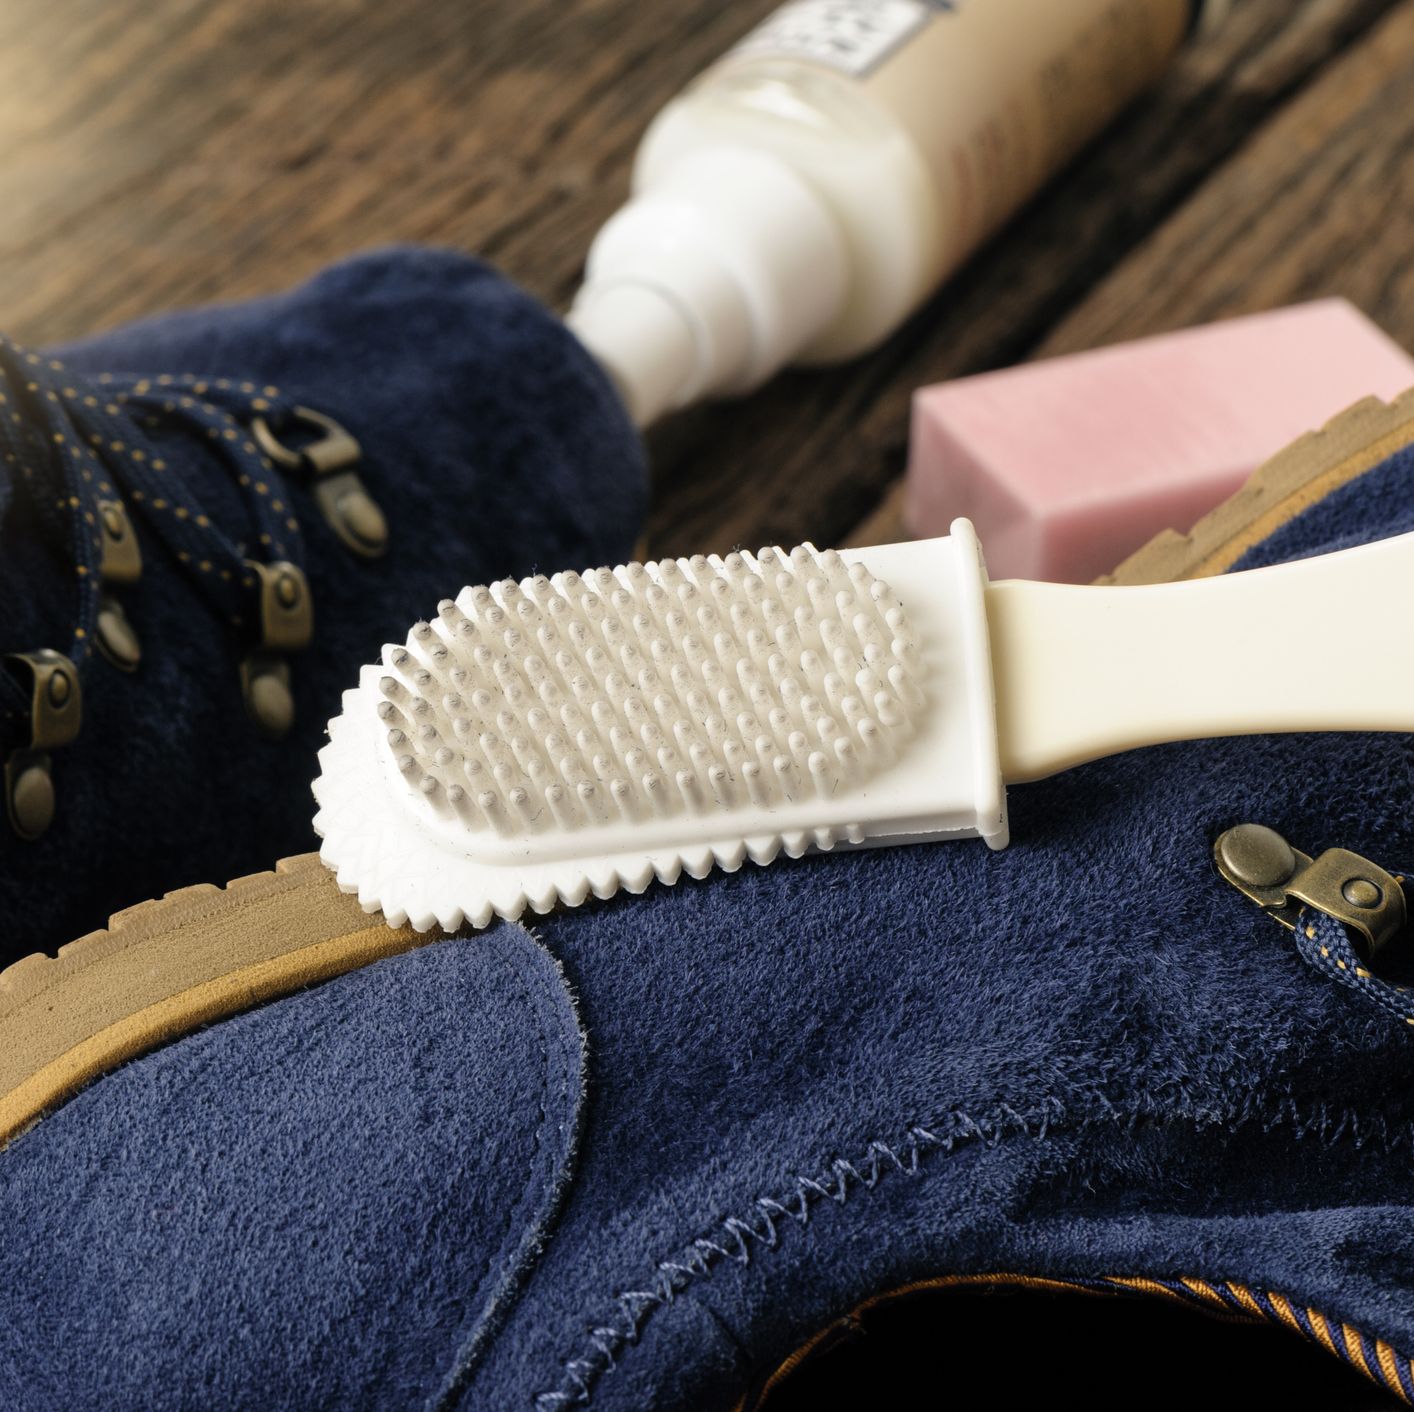 How to clean suede shoes